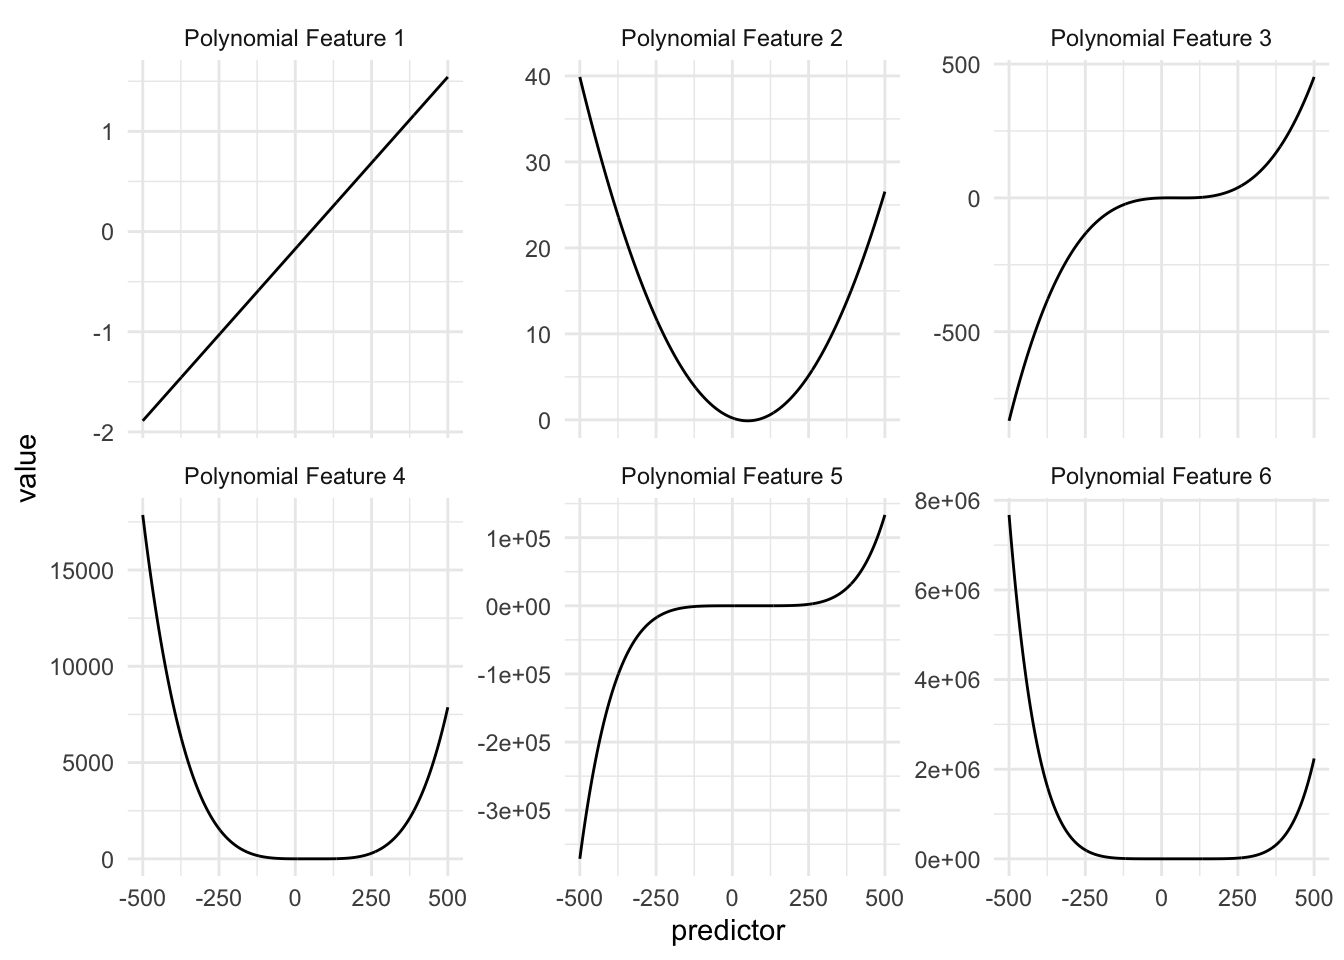 Facetted line chart. Predictor along the x-axis, value along the y-axis. Each of the curves has their endpoints go towards infinite or minus infinite depending on their degree.